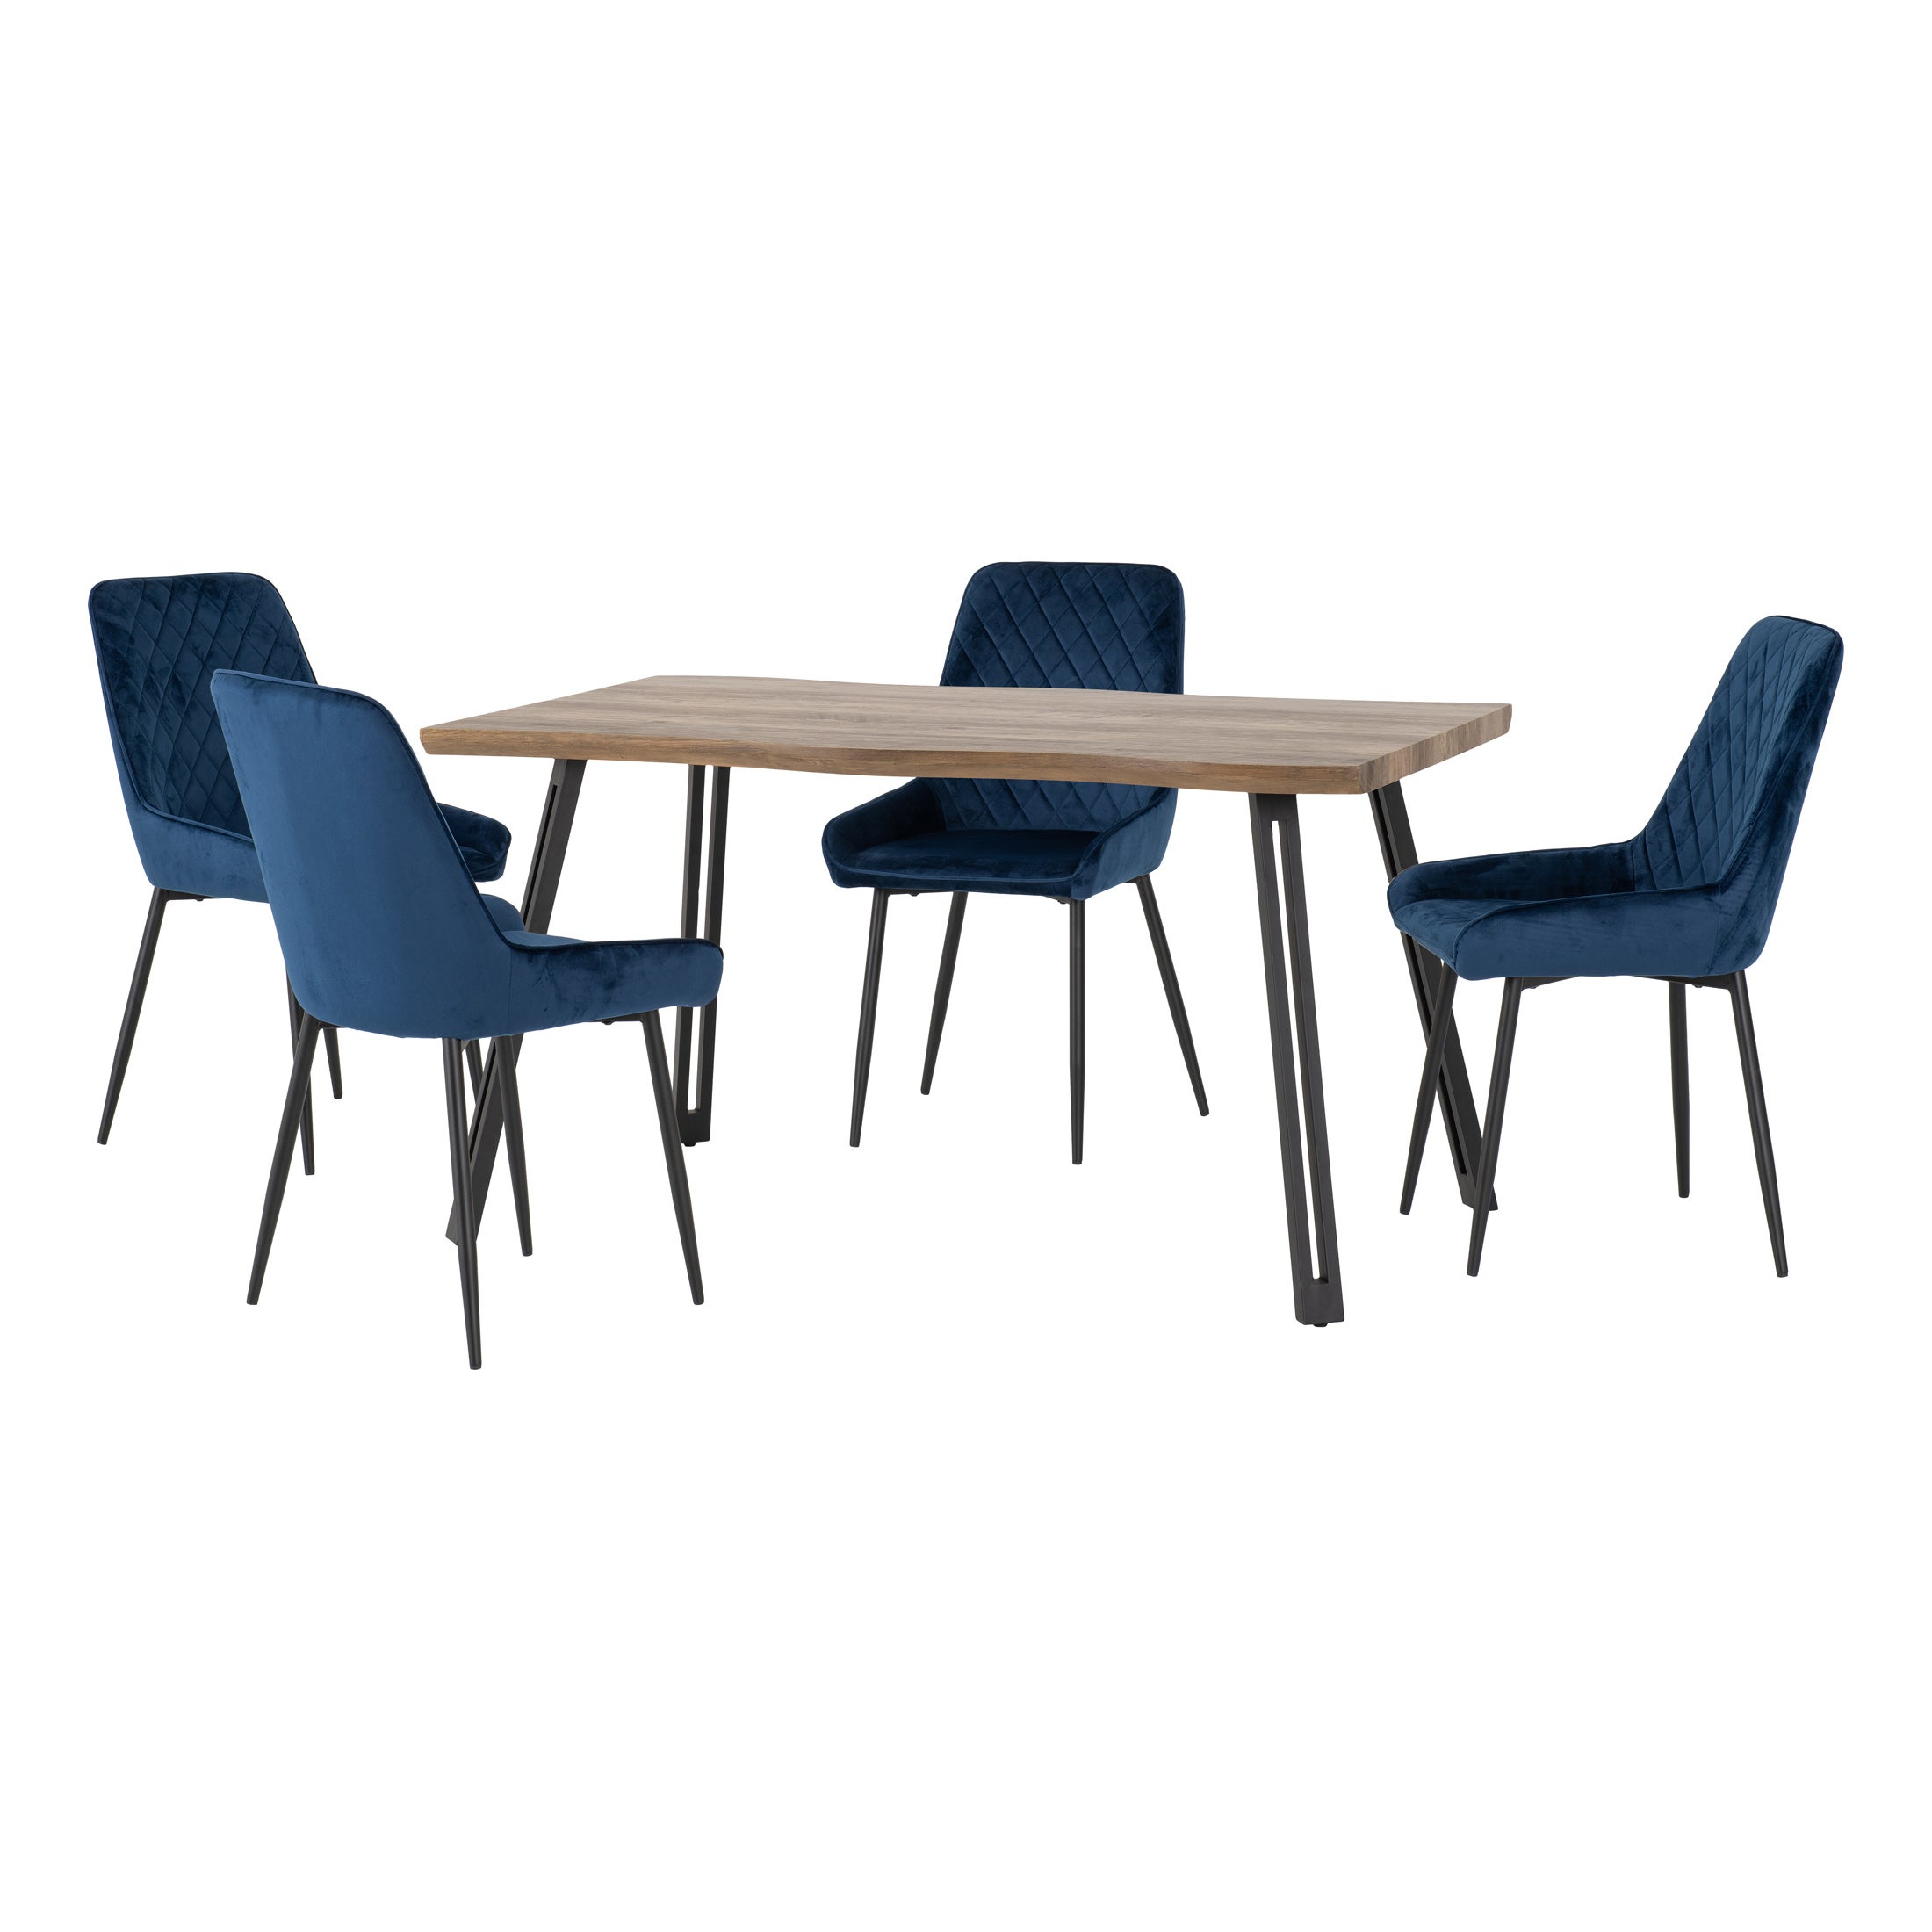 Quebec Wave Rectangular Dining Table with 4 Avery Chairs Navy Blue